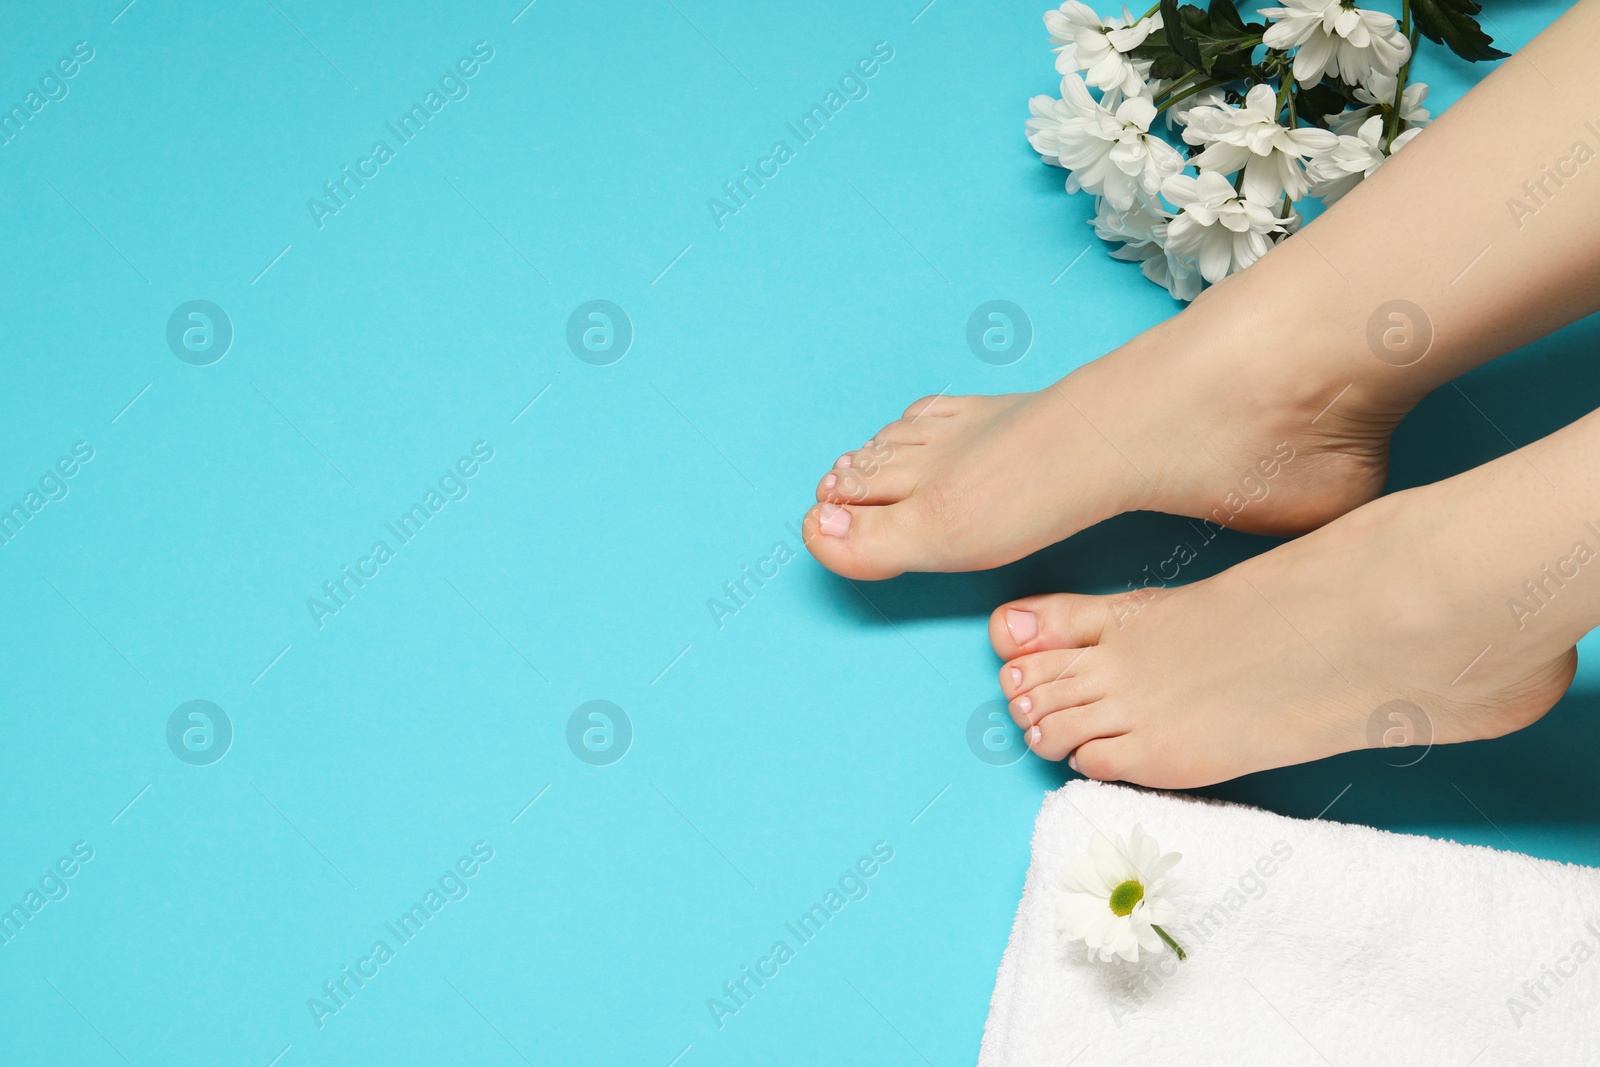 Photo of Woman with neat toenails after pedicure procedure on light blue background, closeup. Space for text